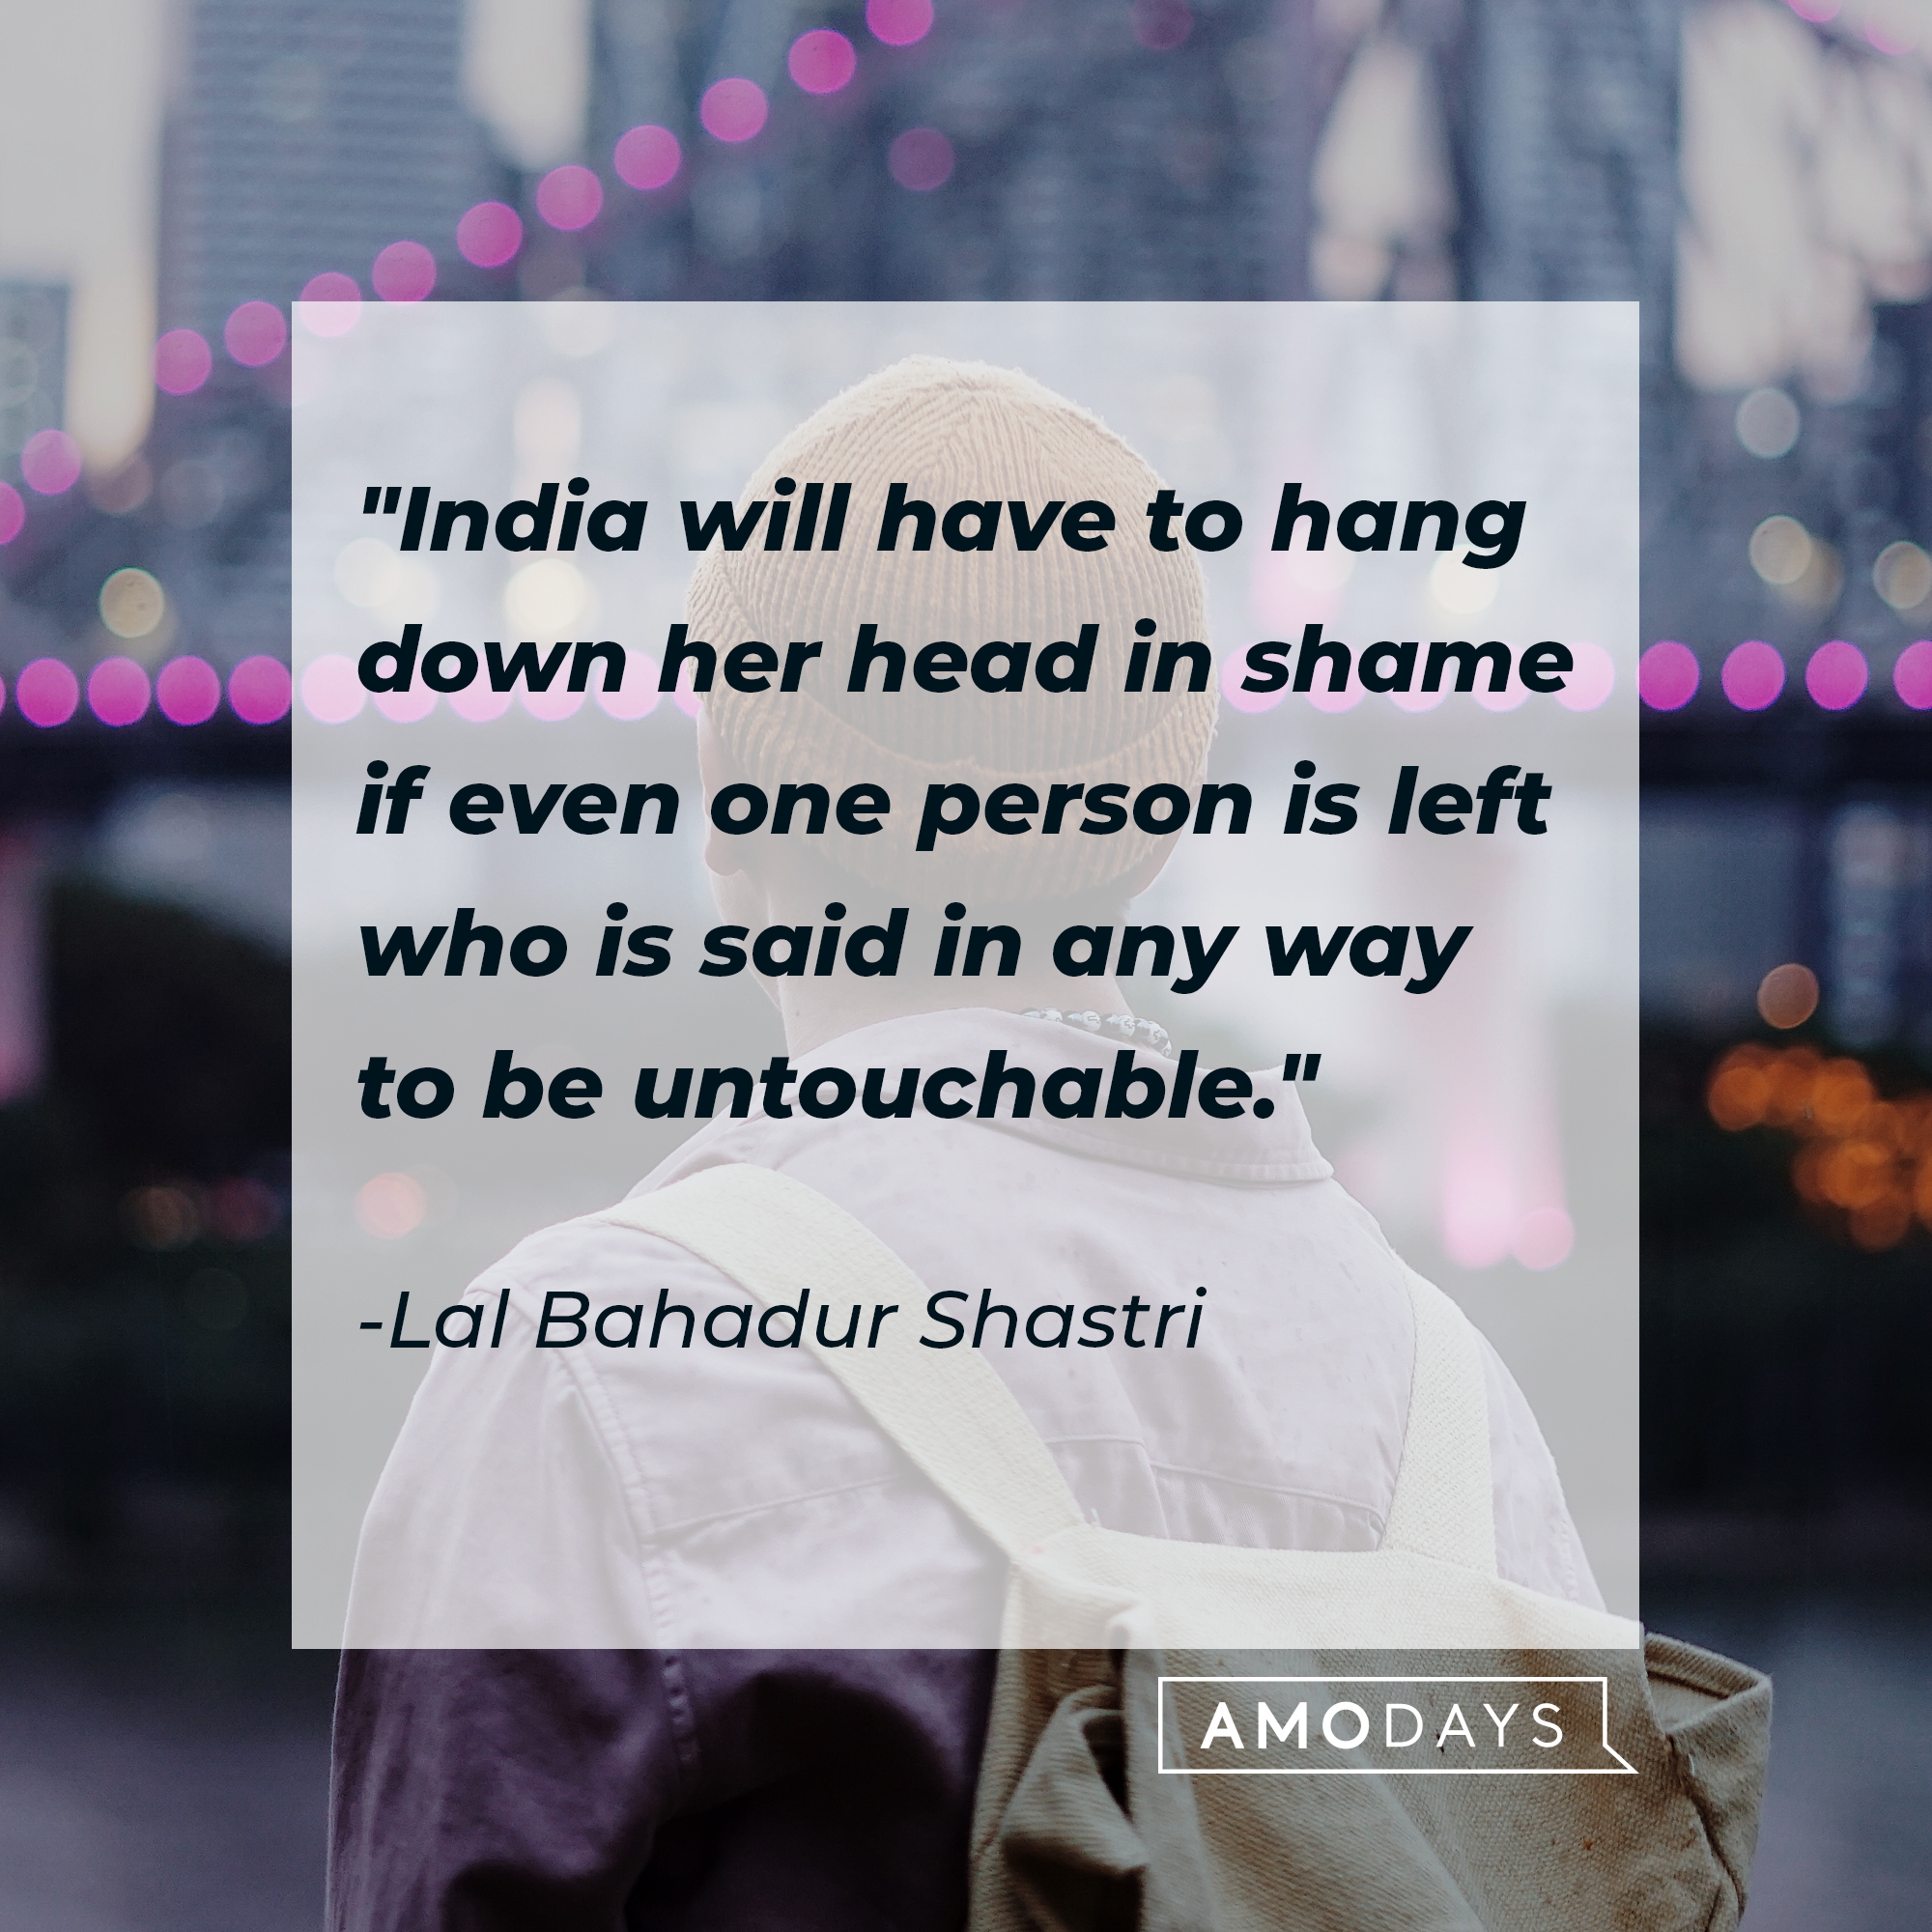 Lal Bahadur Shastri's quote: "India will have to hang down her head in shame if even one person is left who is said in any way to be untouchable." | Source: Unsplash